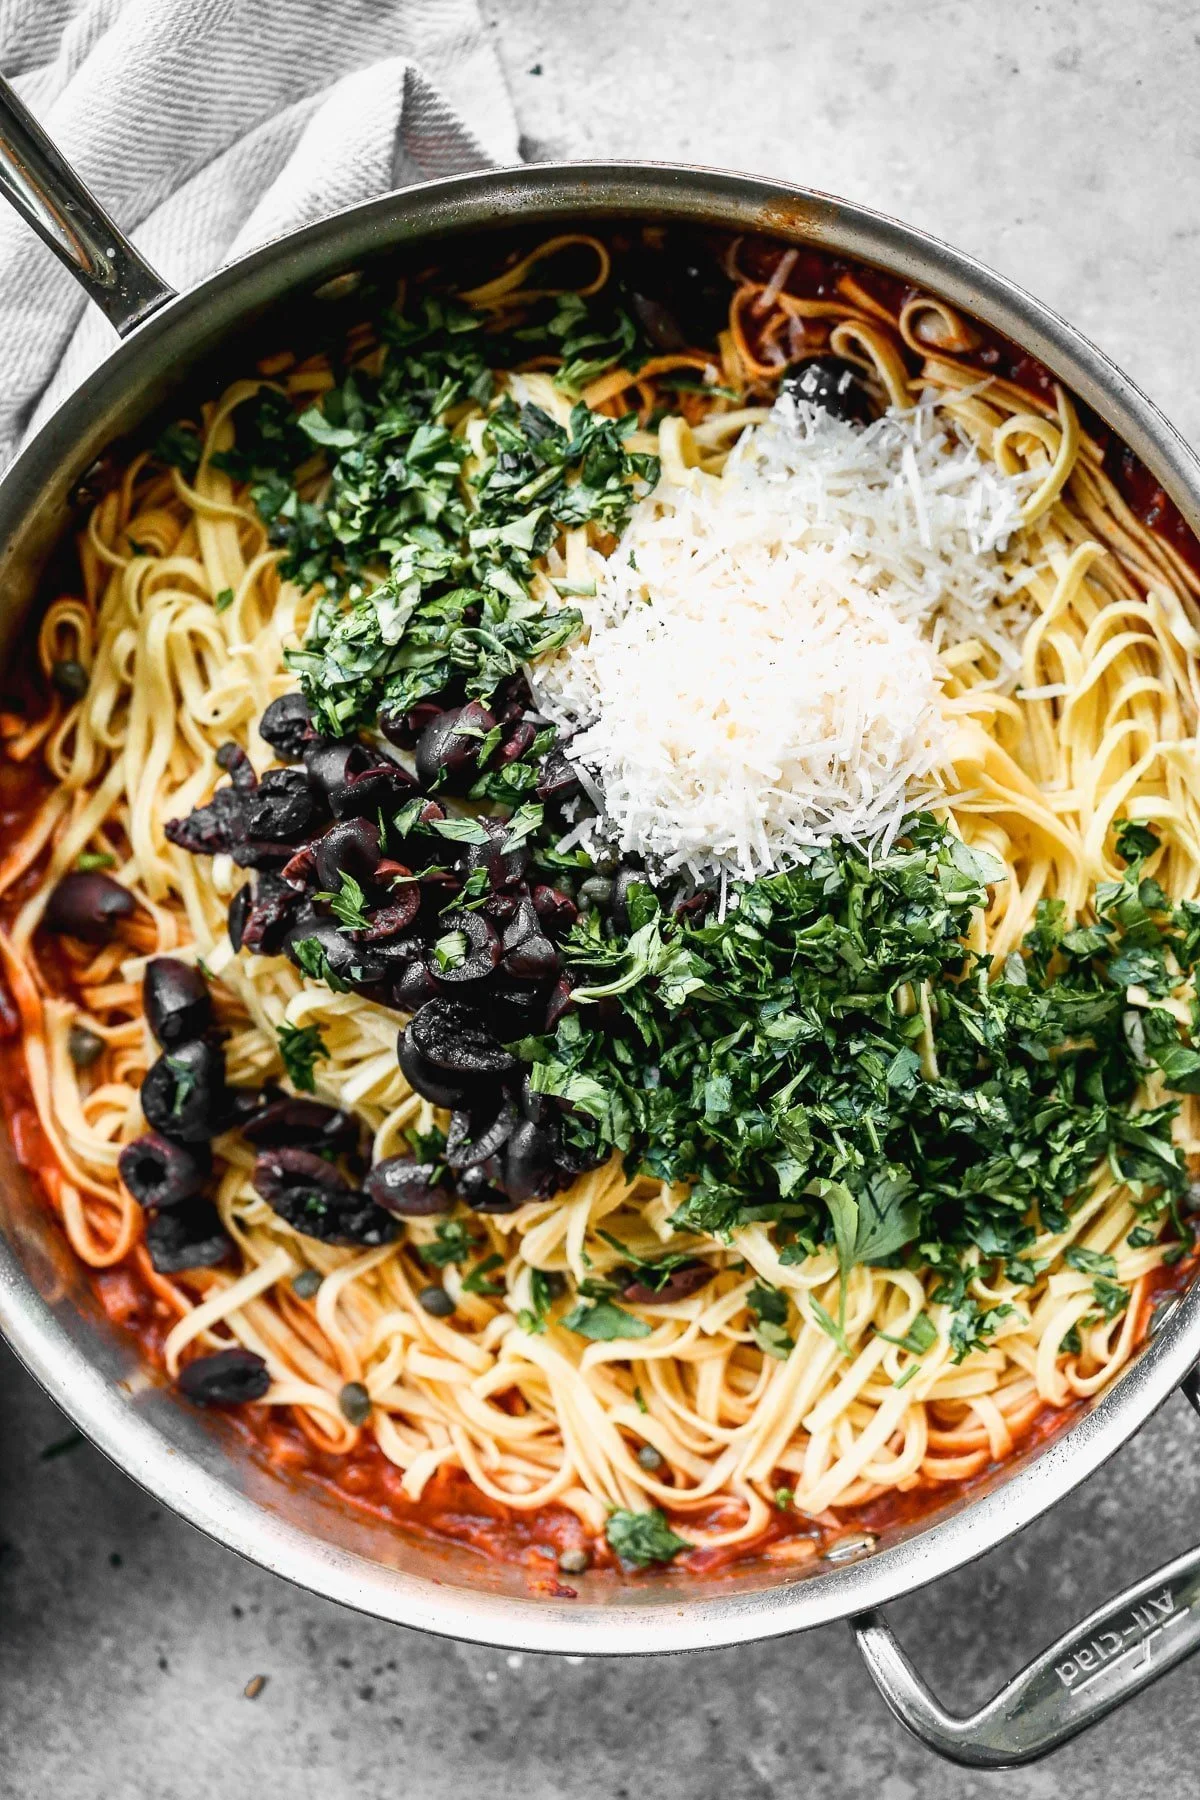 Linguine with parmesan, capers, olives, and parmesan cheese